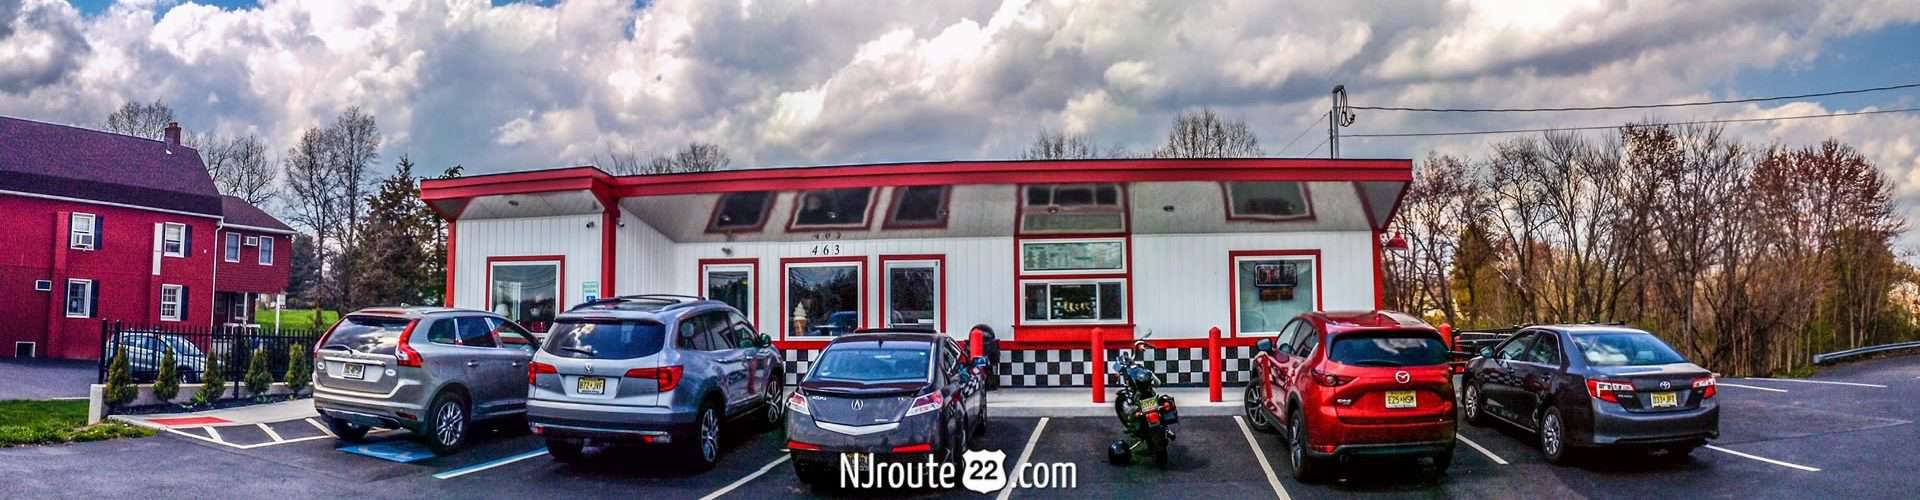 Thee Ice Cream Parlor NJroute22 Featured Image